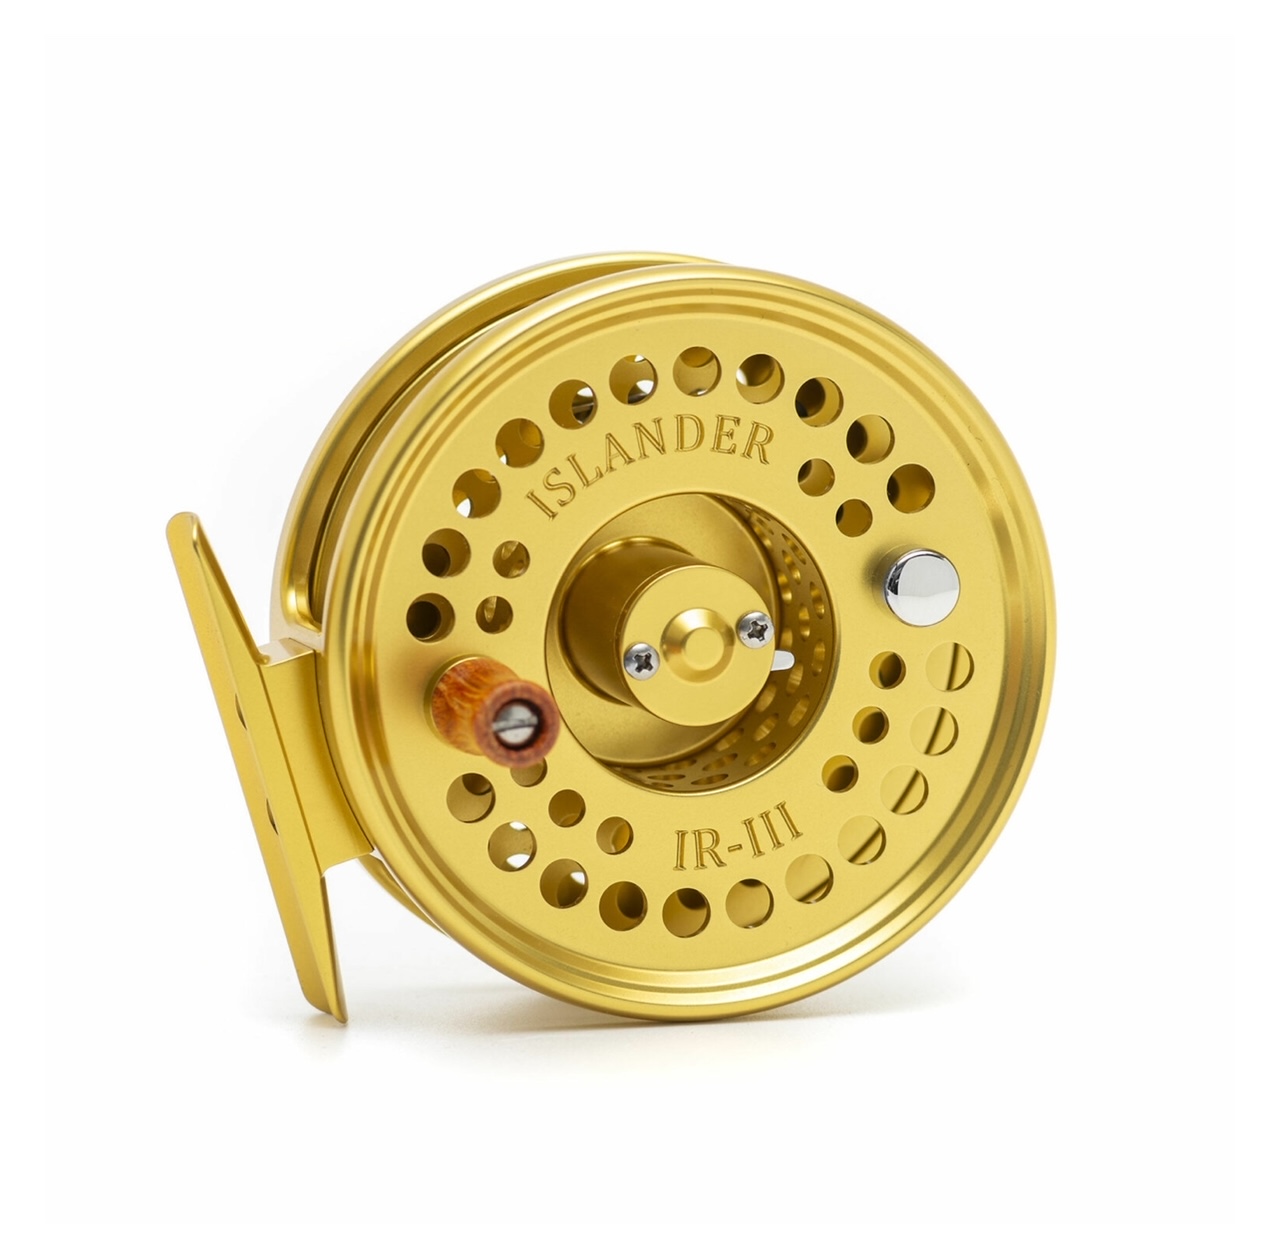 Nautilus X-Series XL Max Fly Reel – The First Cast – Hook, Line